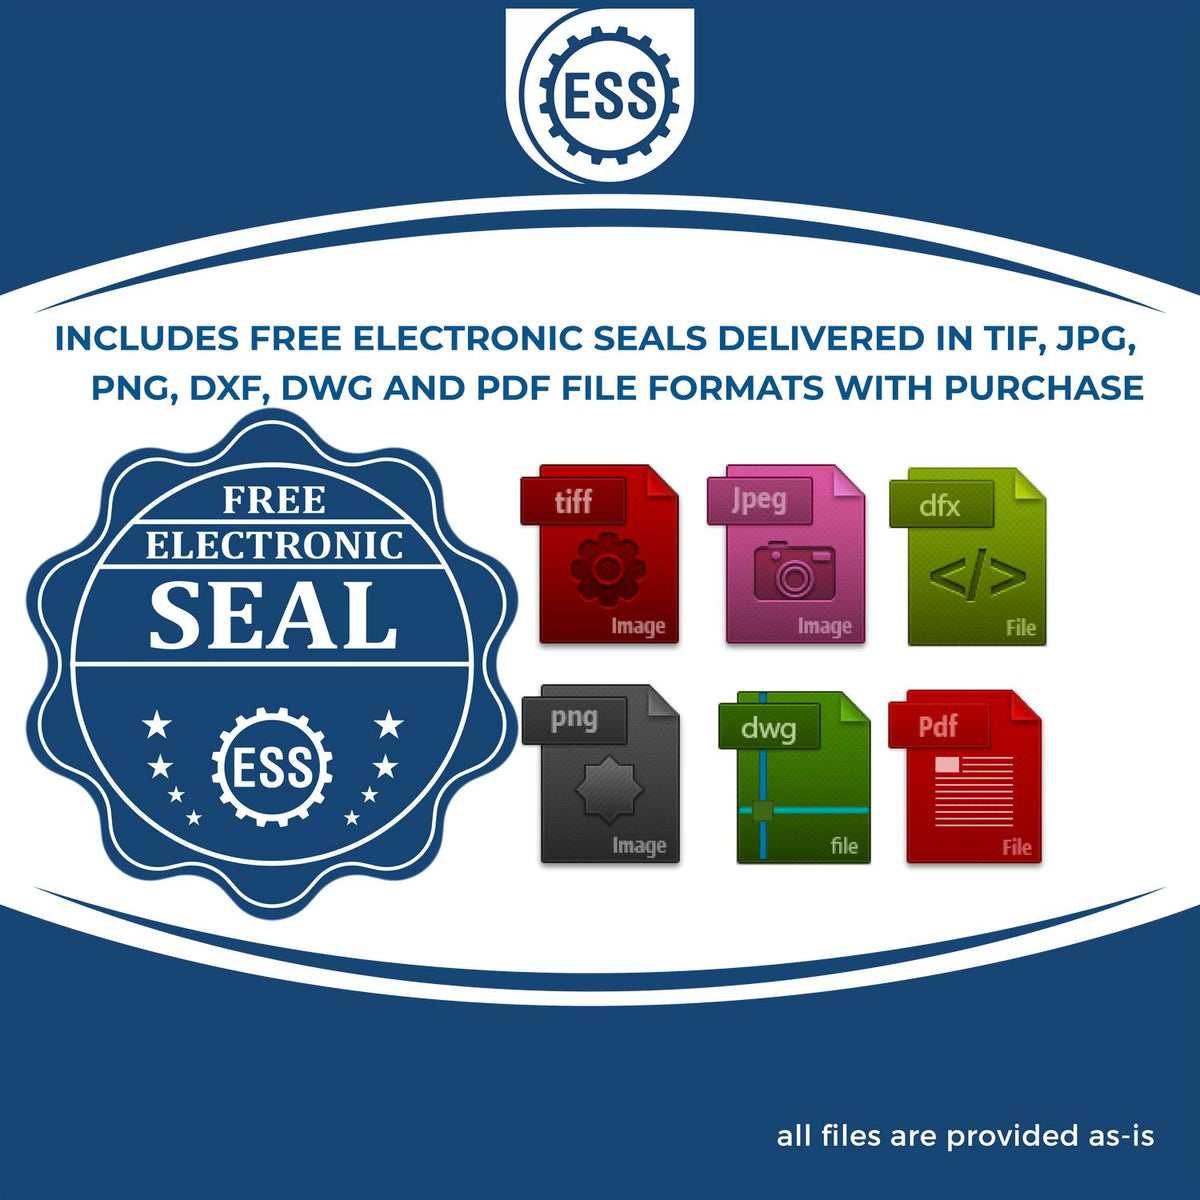 An infographic for the free electronic seal for the Wooden Handle Wyoming Rectangular Notary Public Stamp illustrating the different file type icons such as DXF, DWG, TIF, JPG and PNG.